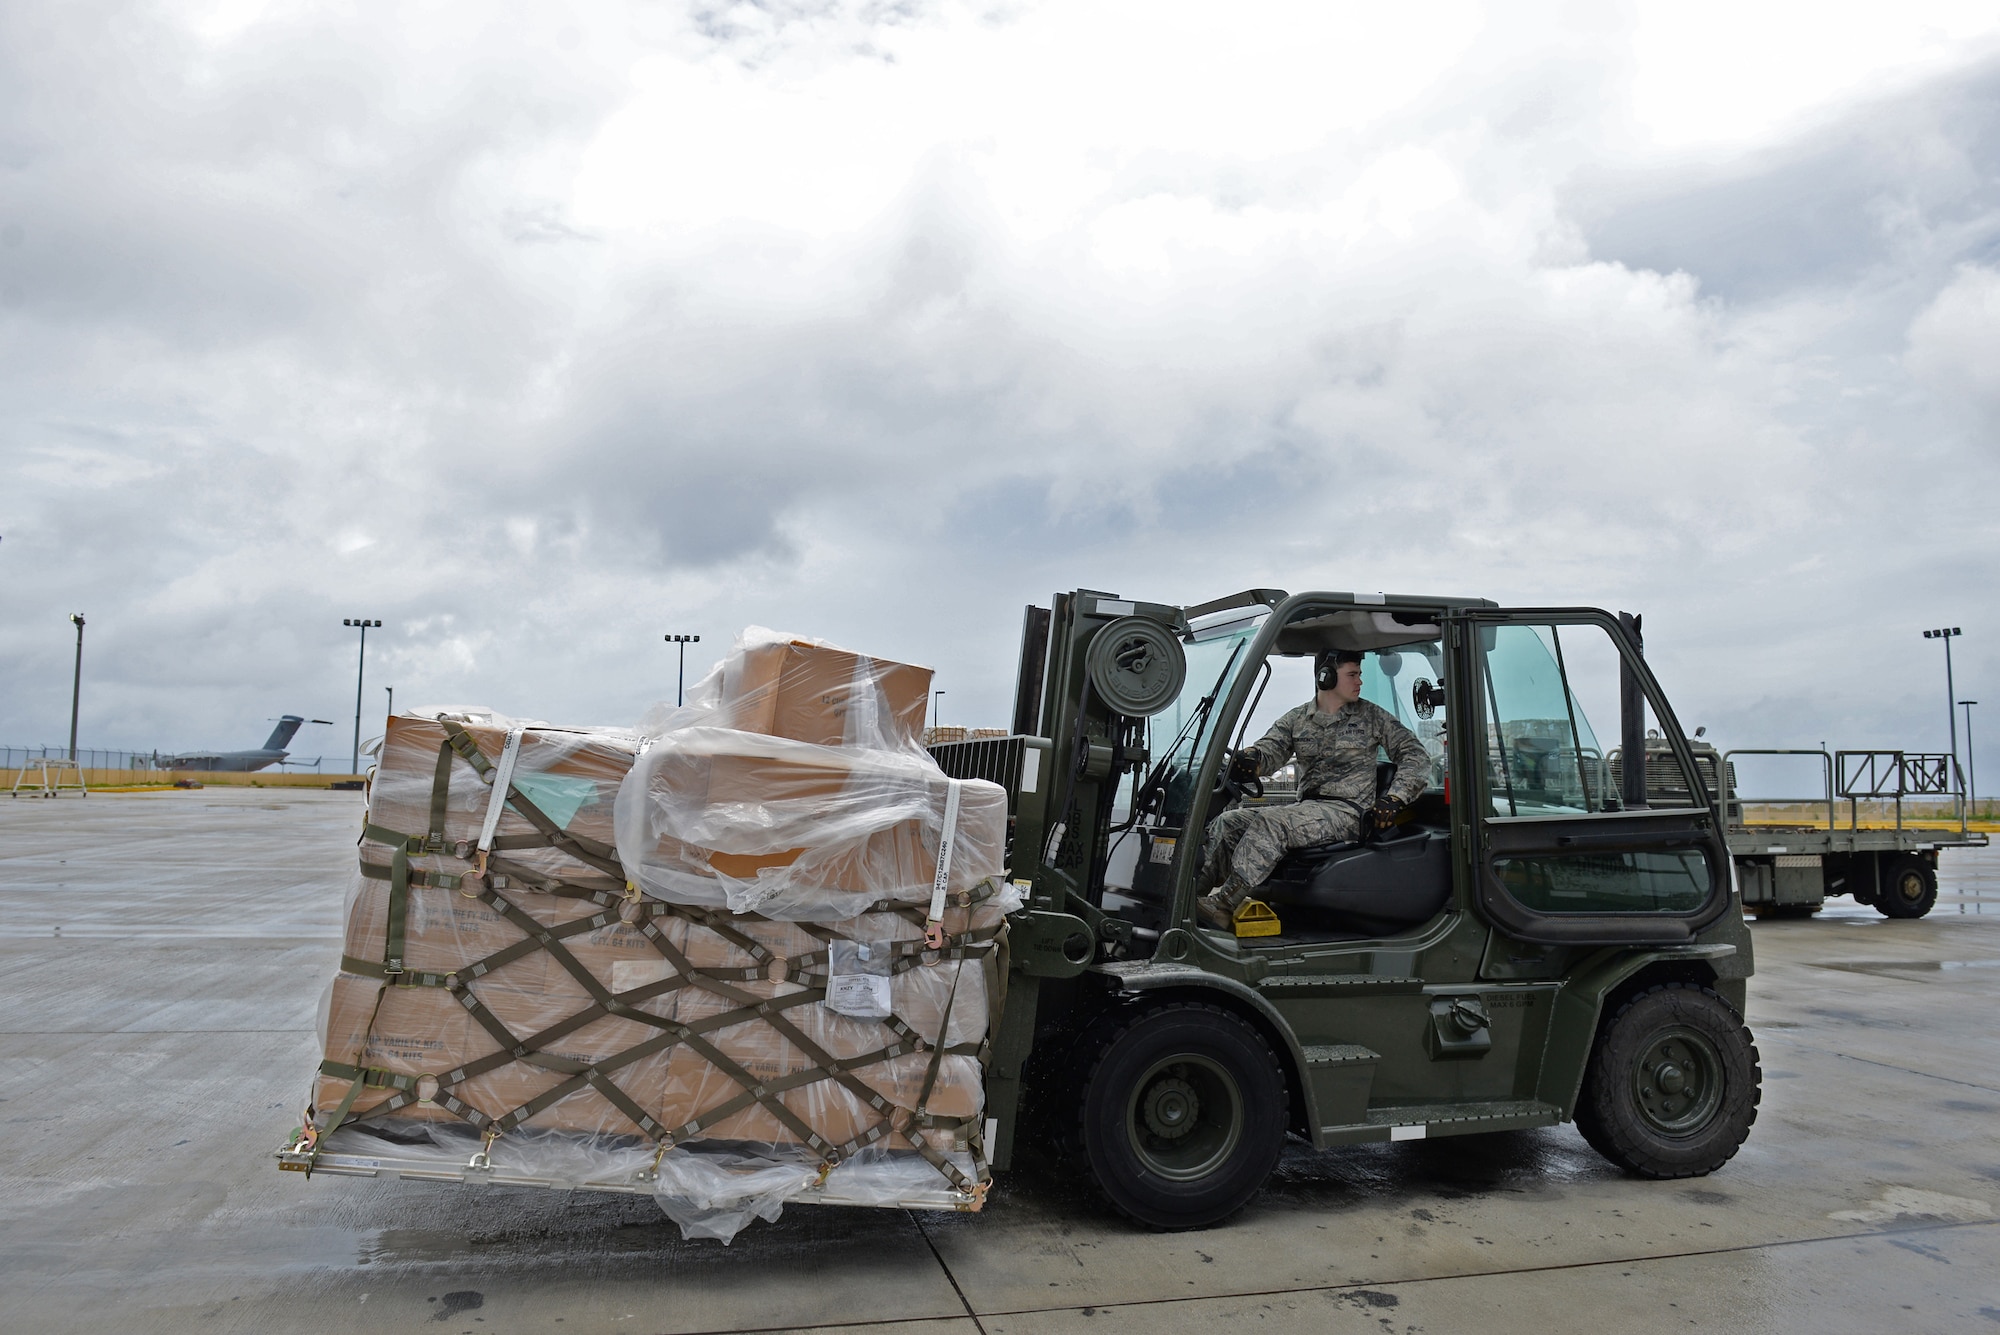 Staff Sgt. Randy Adkison, 734th Air Mobility Squadron freight supervisor, uses a forklift to transport a pallet of coffee August 18, 2016, at Andersen Air Force Base, Guam. The 36th Wing Chapel uses coffee as a tool to bridge the gap between service members and the Chaplain Corps. (U.S. Air Force photo by Airman 1st Class Jacob Skovo)